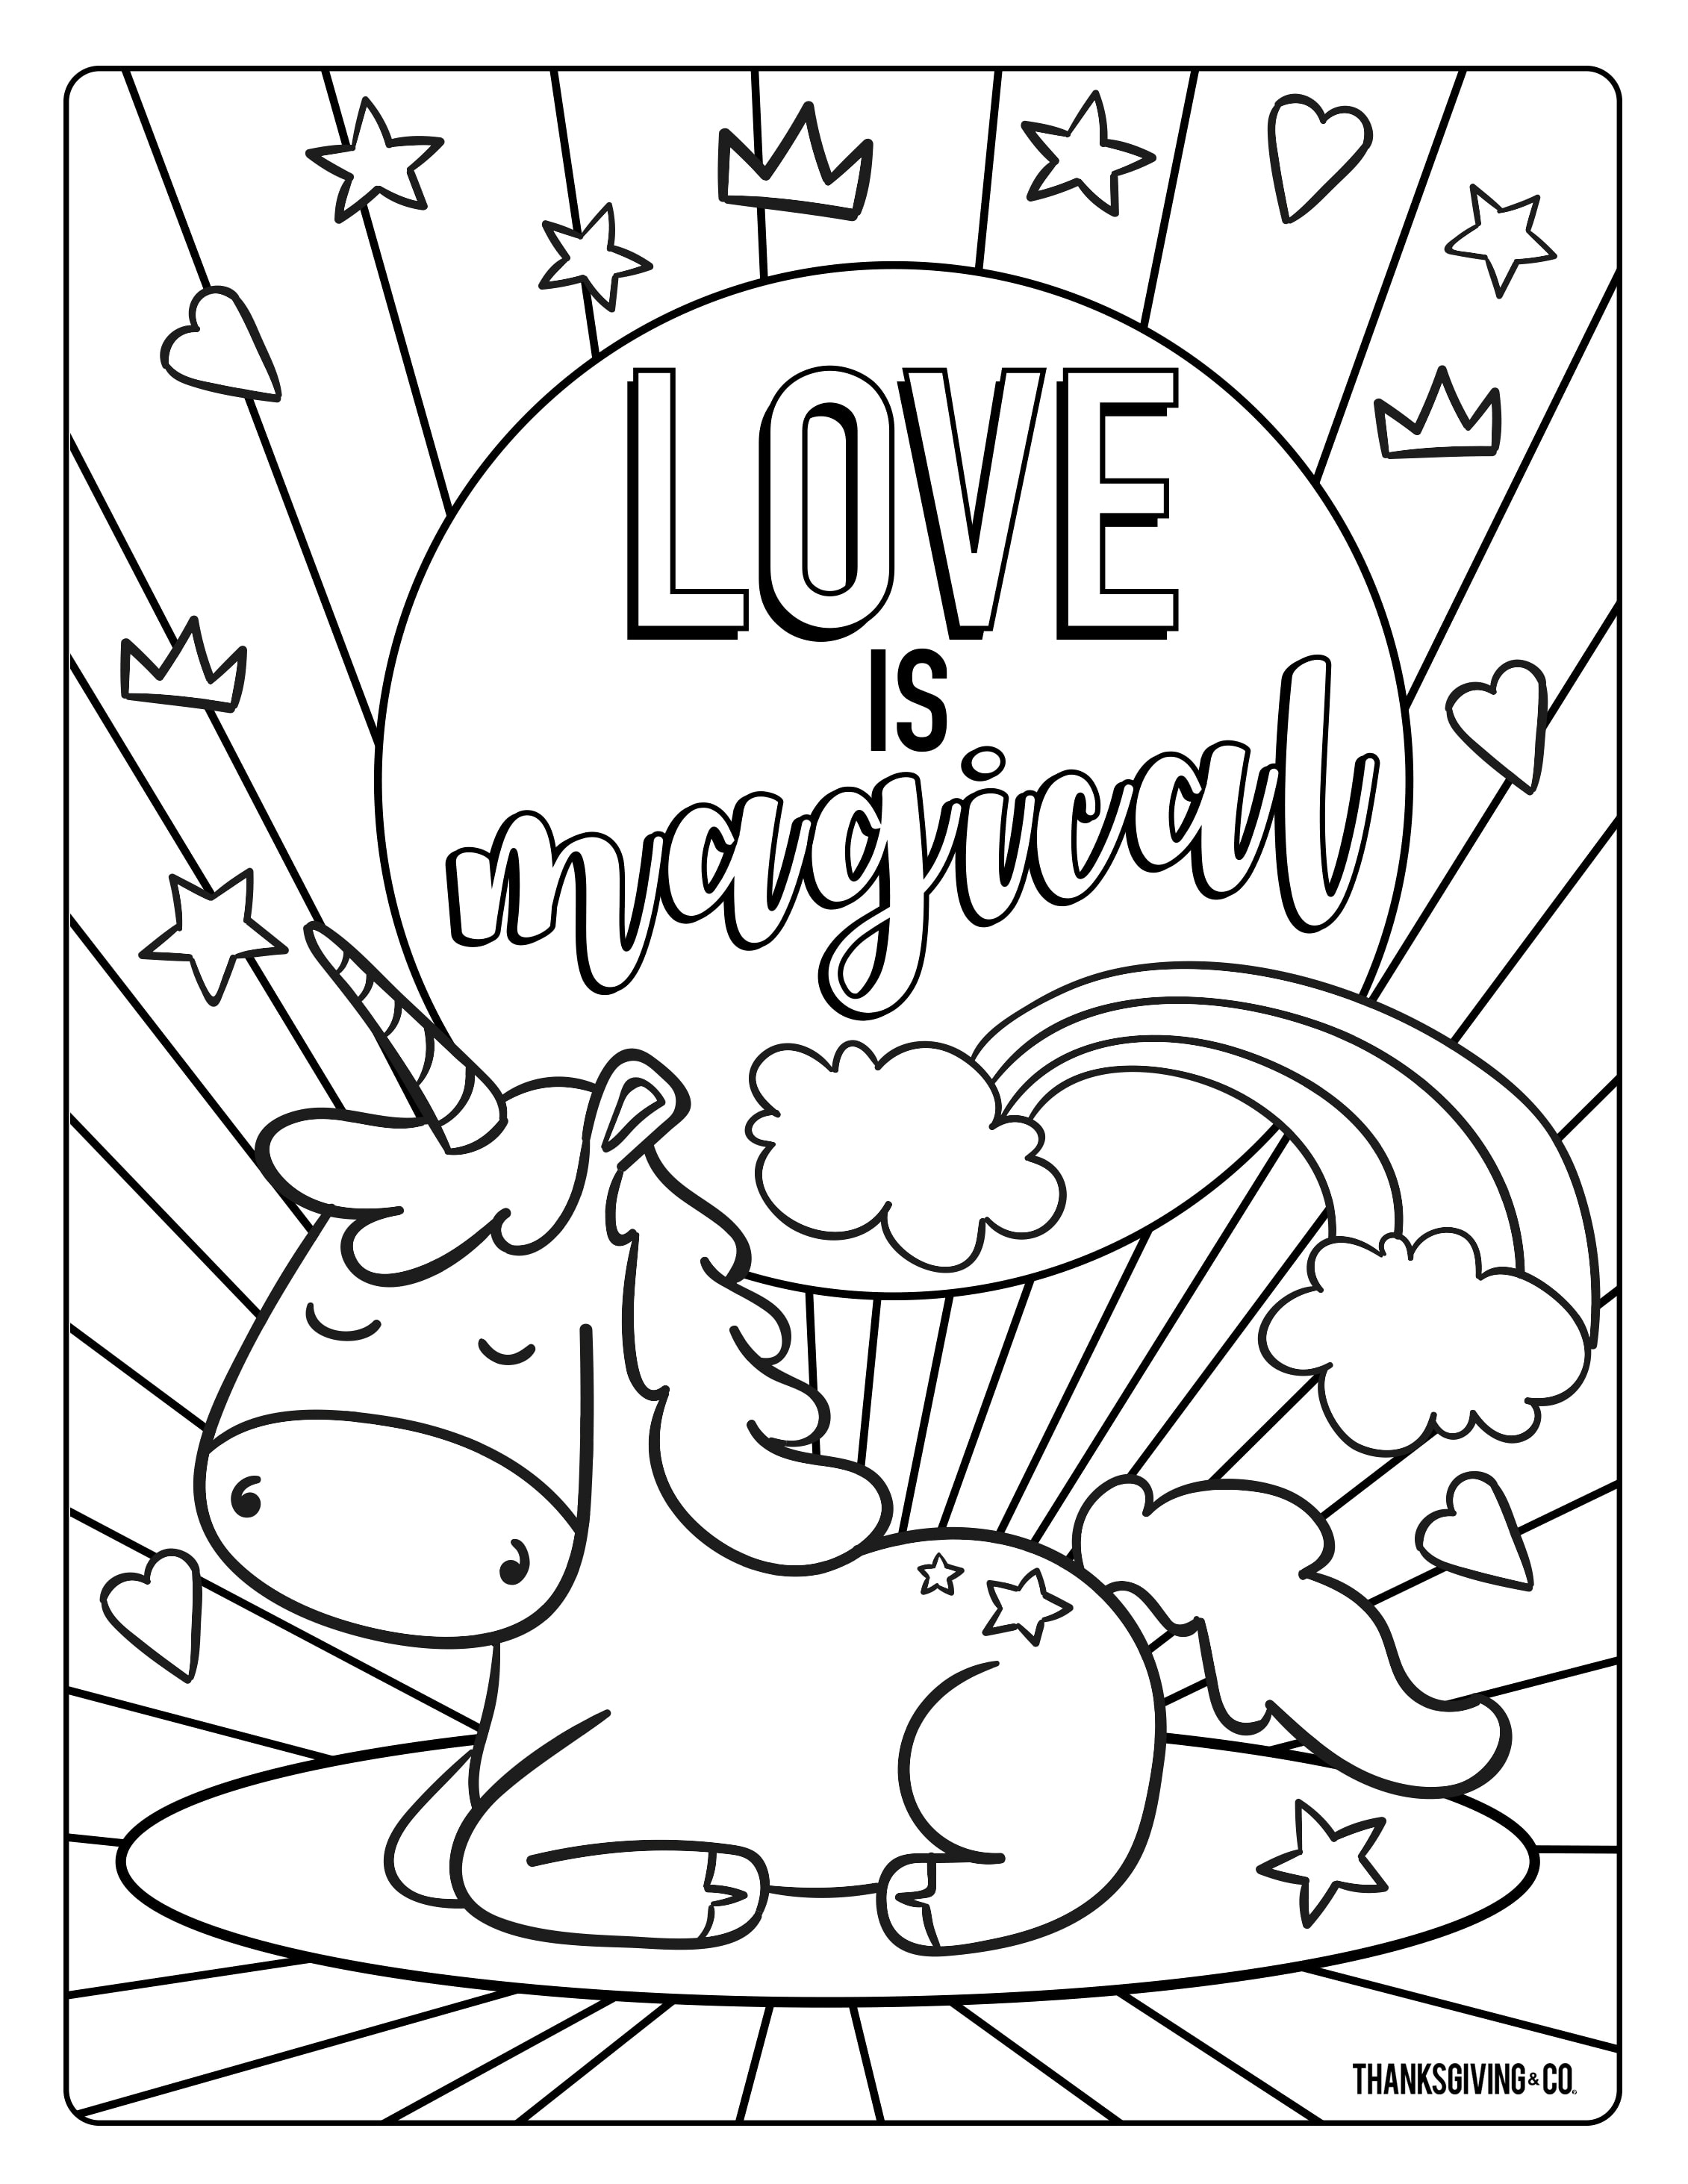 Love Is Magical Coloring Page